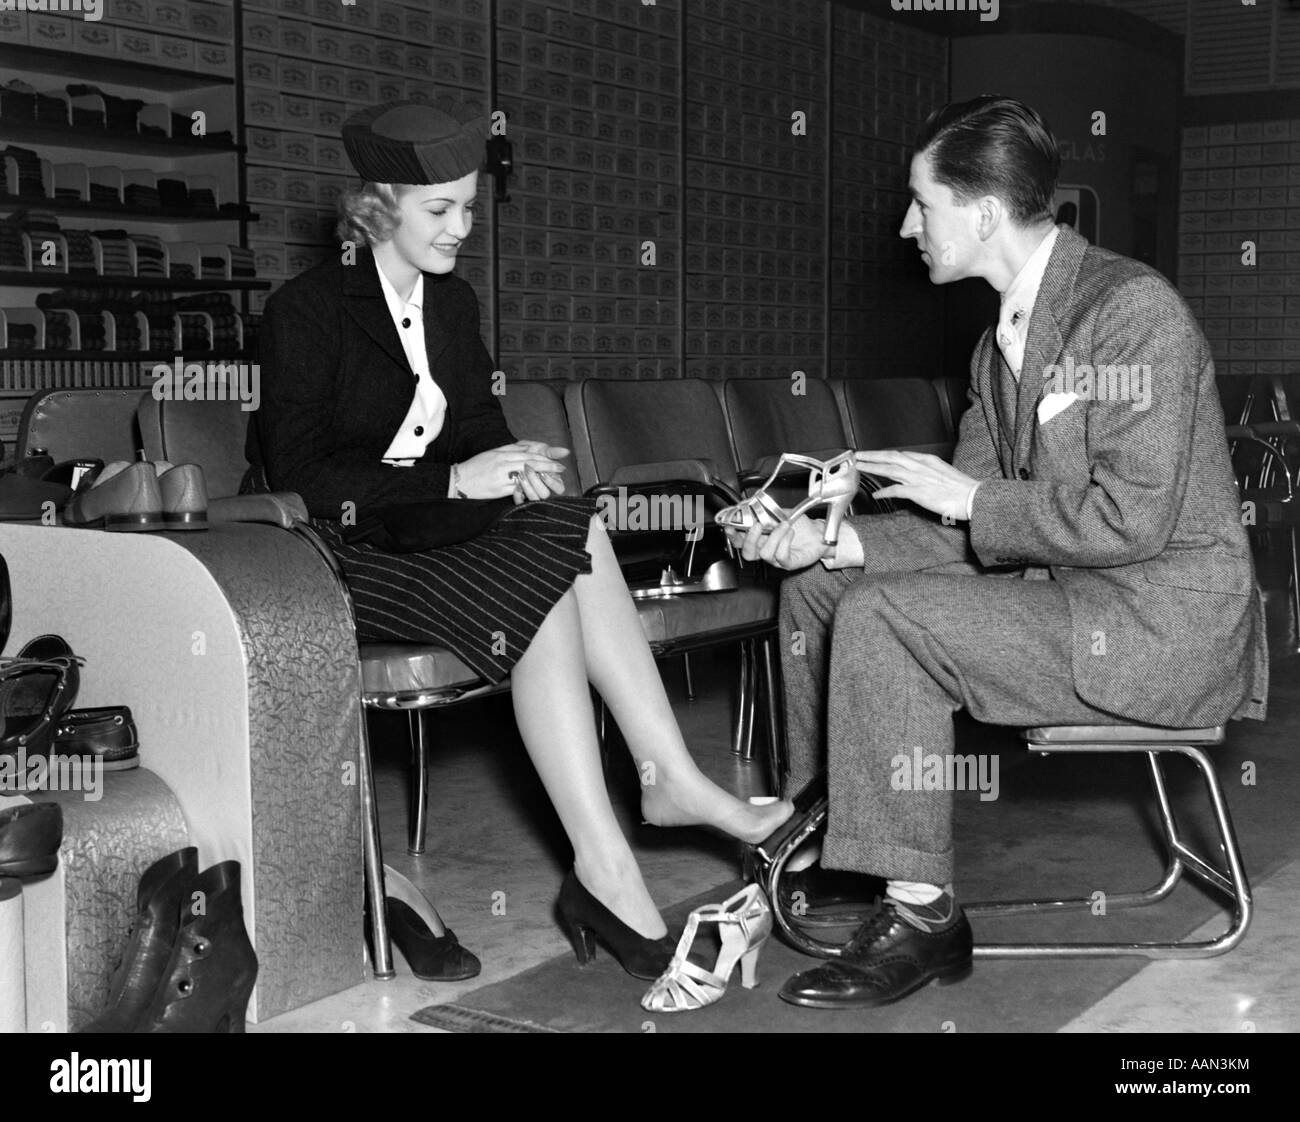 1930s SHOE SALESMAN HELPING WOMAN TRY ON PAIR HIGH HEELS IN RETAIL SHOE STORE Stock Photo